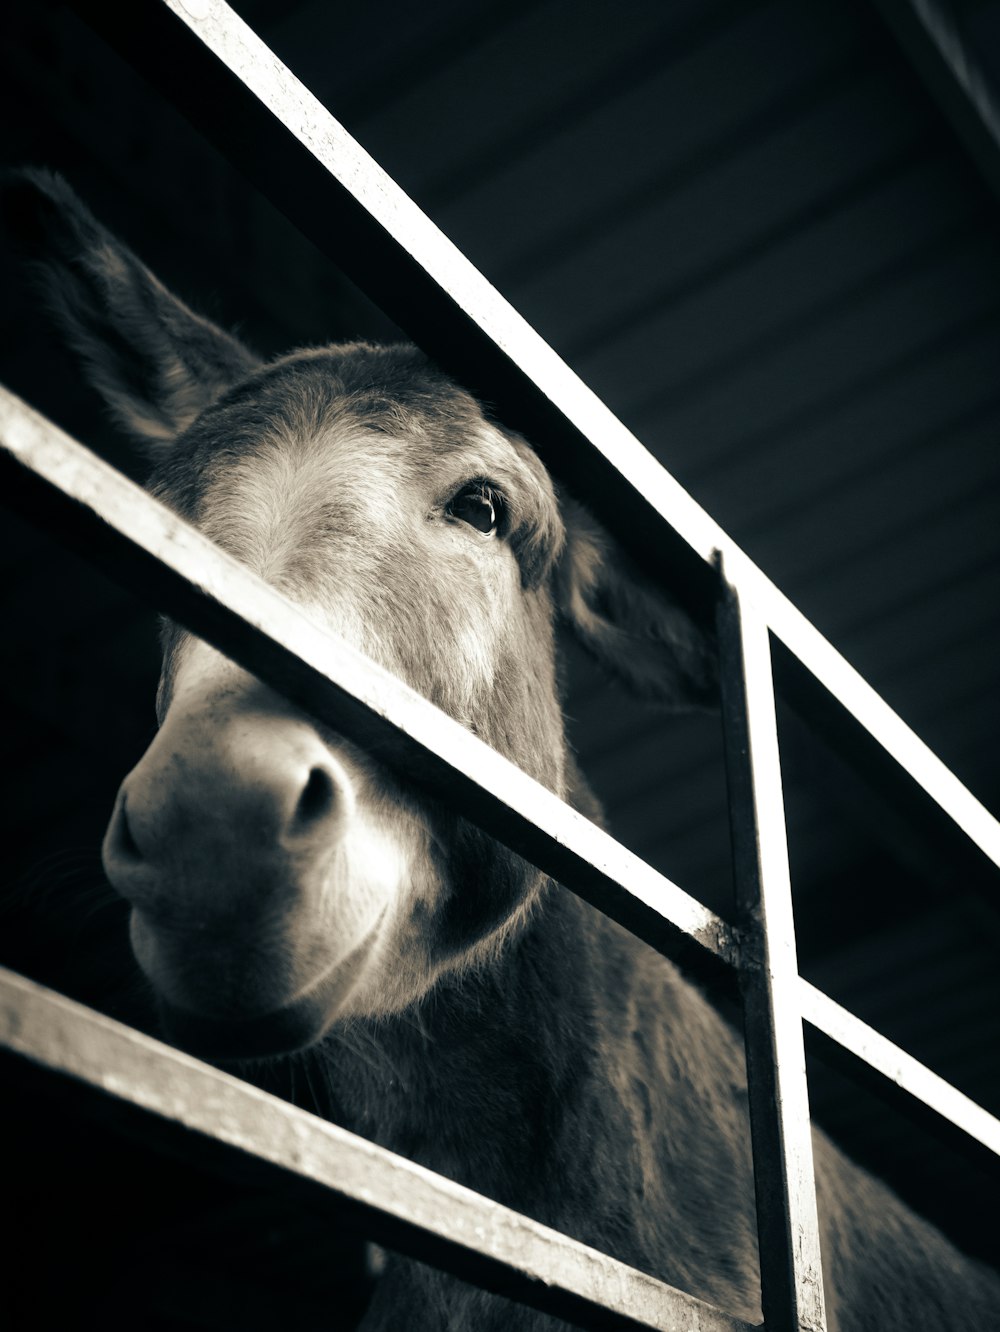 a donkey looking over a fence at the camera